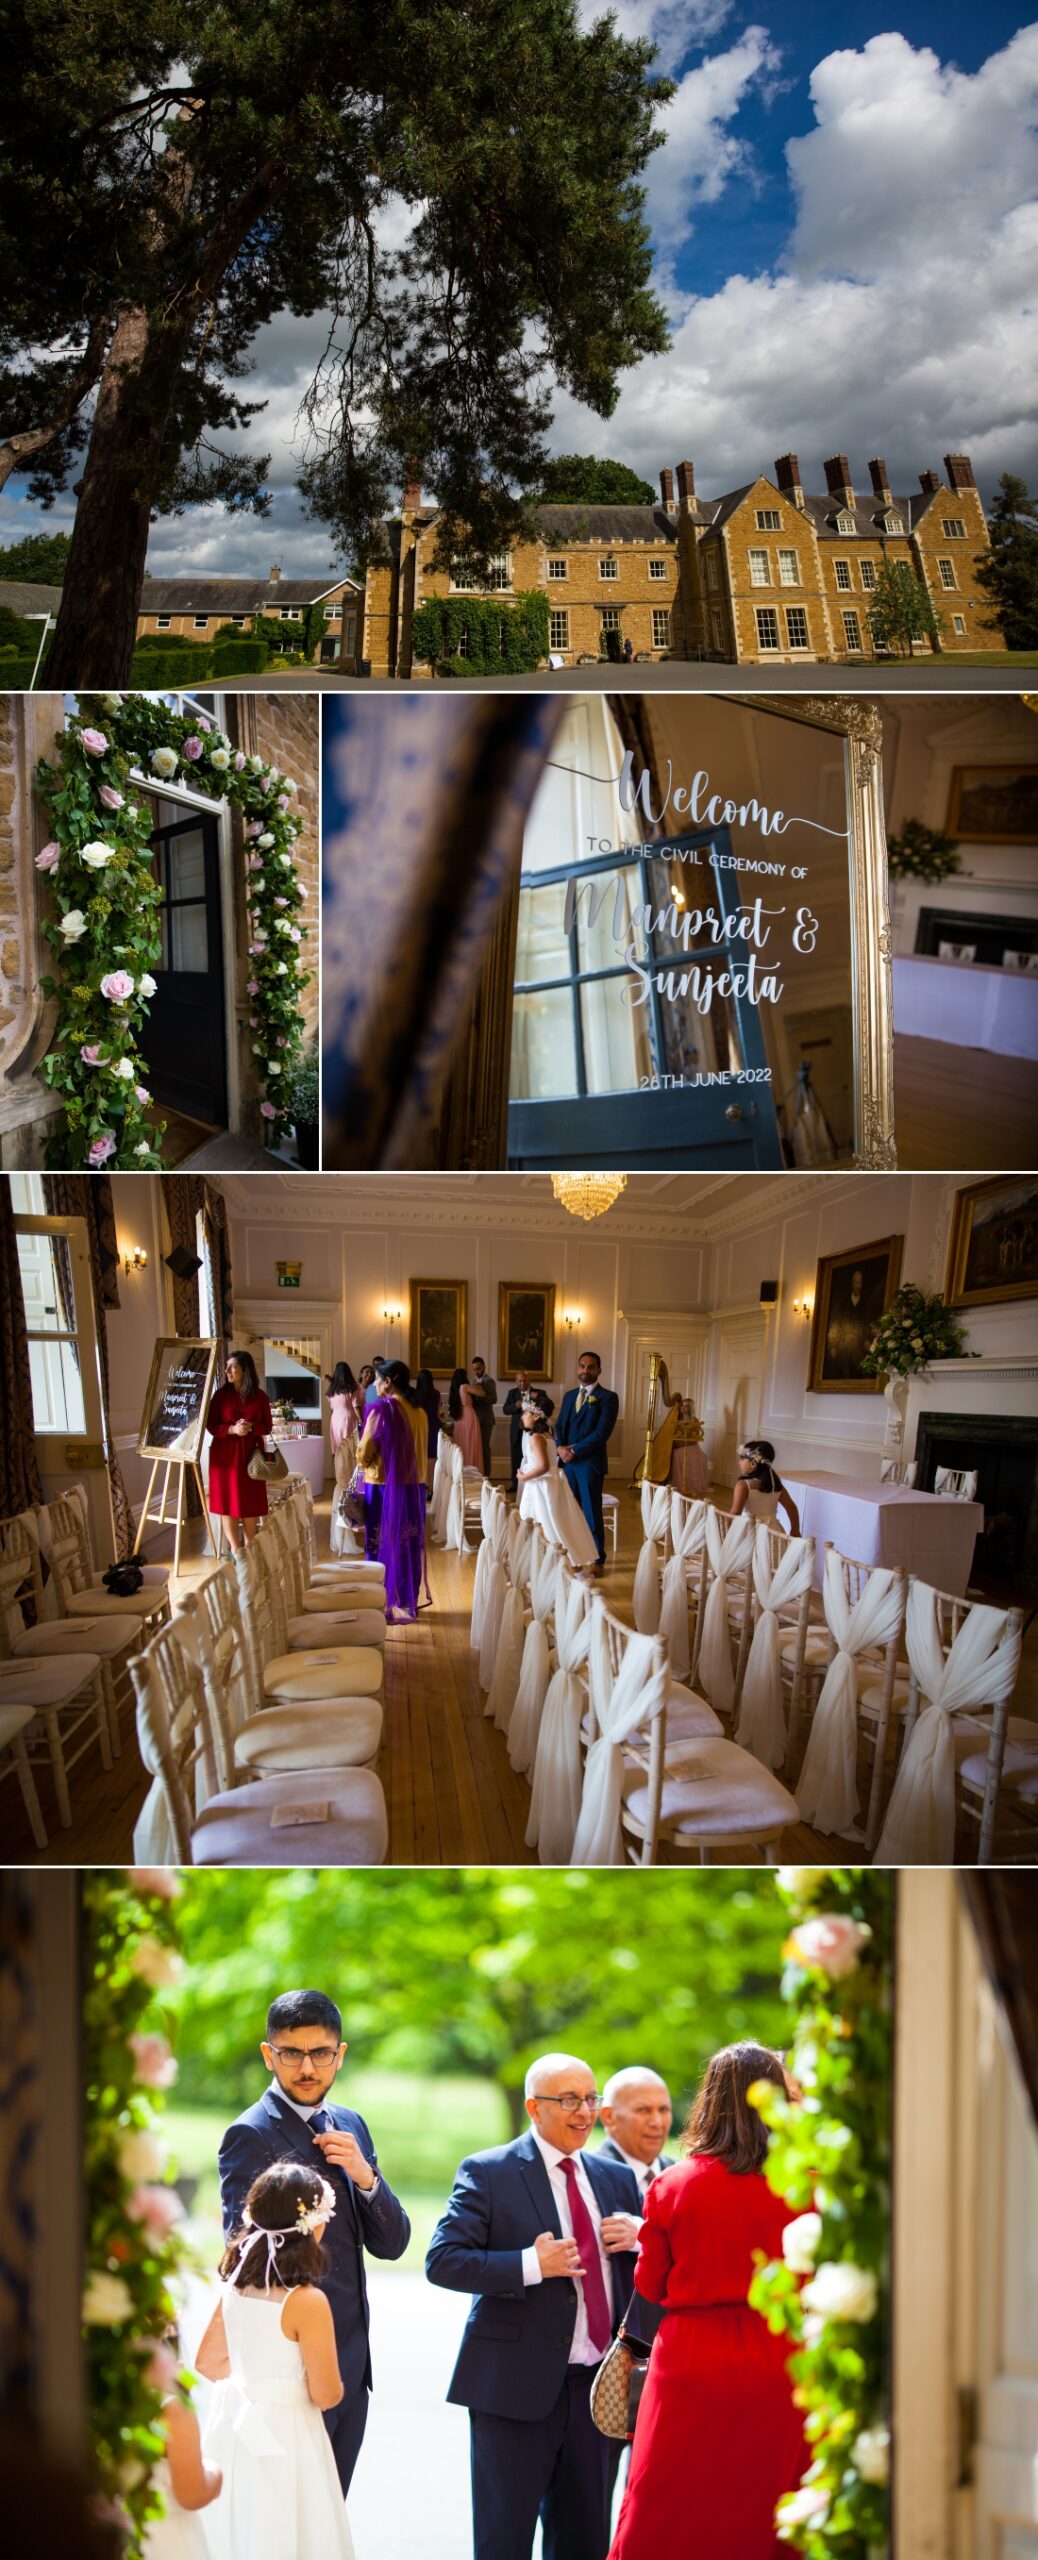 Civil Wedding Photography & Videography at Brooksby Hall 1